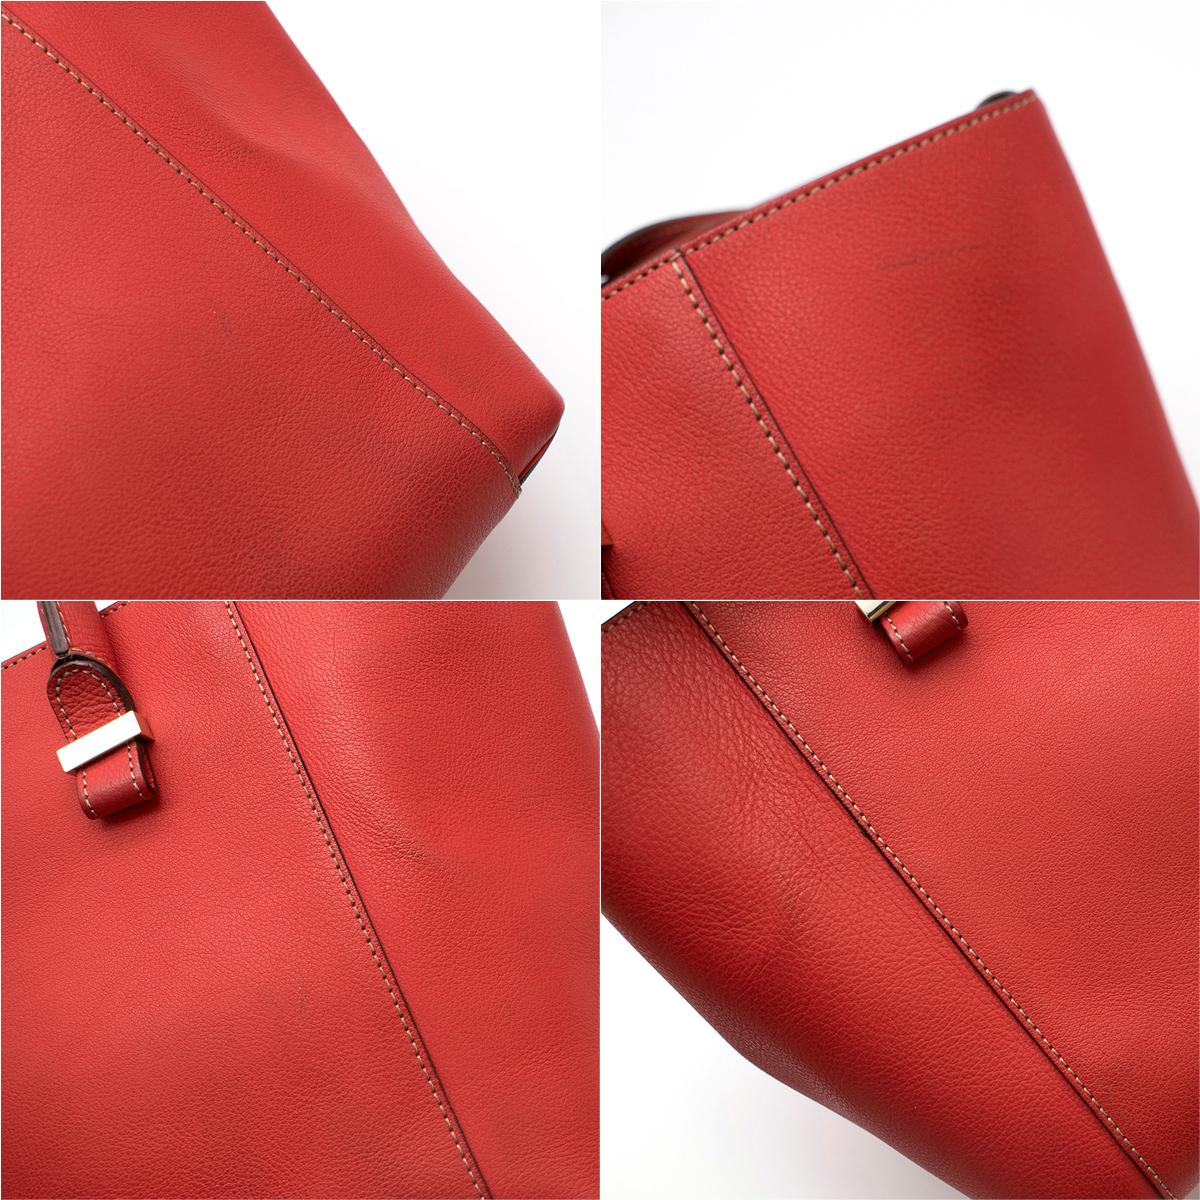 Victoria Beckham Red Liberty Leather Tote bag   5